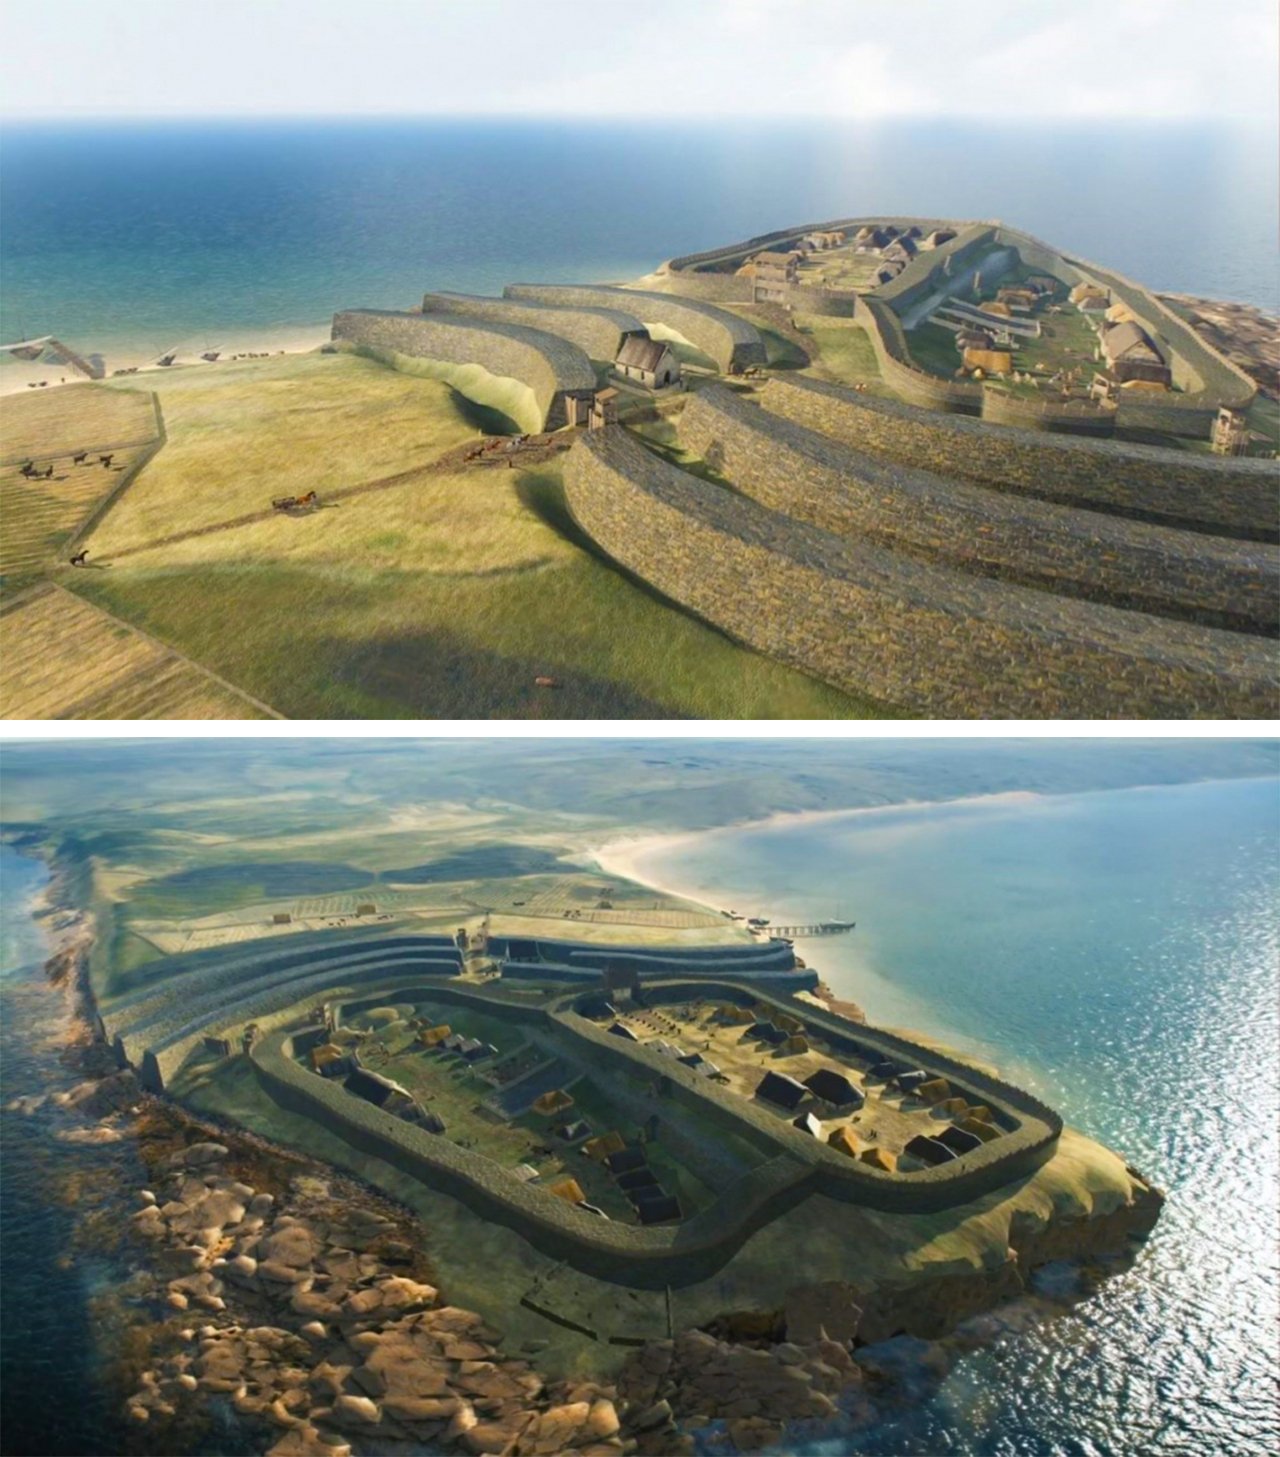 A two-part image of a Burghead fort on a peninsula. The top image is an aerial view of the fort from the land side, showing its stone structure and multiple levels and sections. The bottom image is an aerial view of the Burghead fort from the sea side, showing its location on a green grassy area with a beach and a rocky coastline. The fort has multiple walls, and is surrounded by water on three sides. The sky is blue and the water is a light blue-green color.